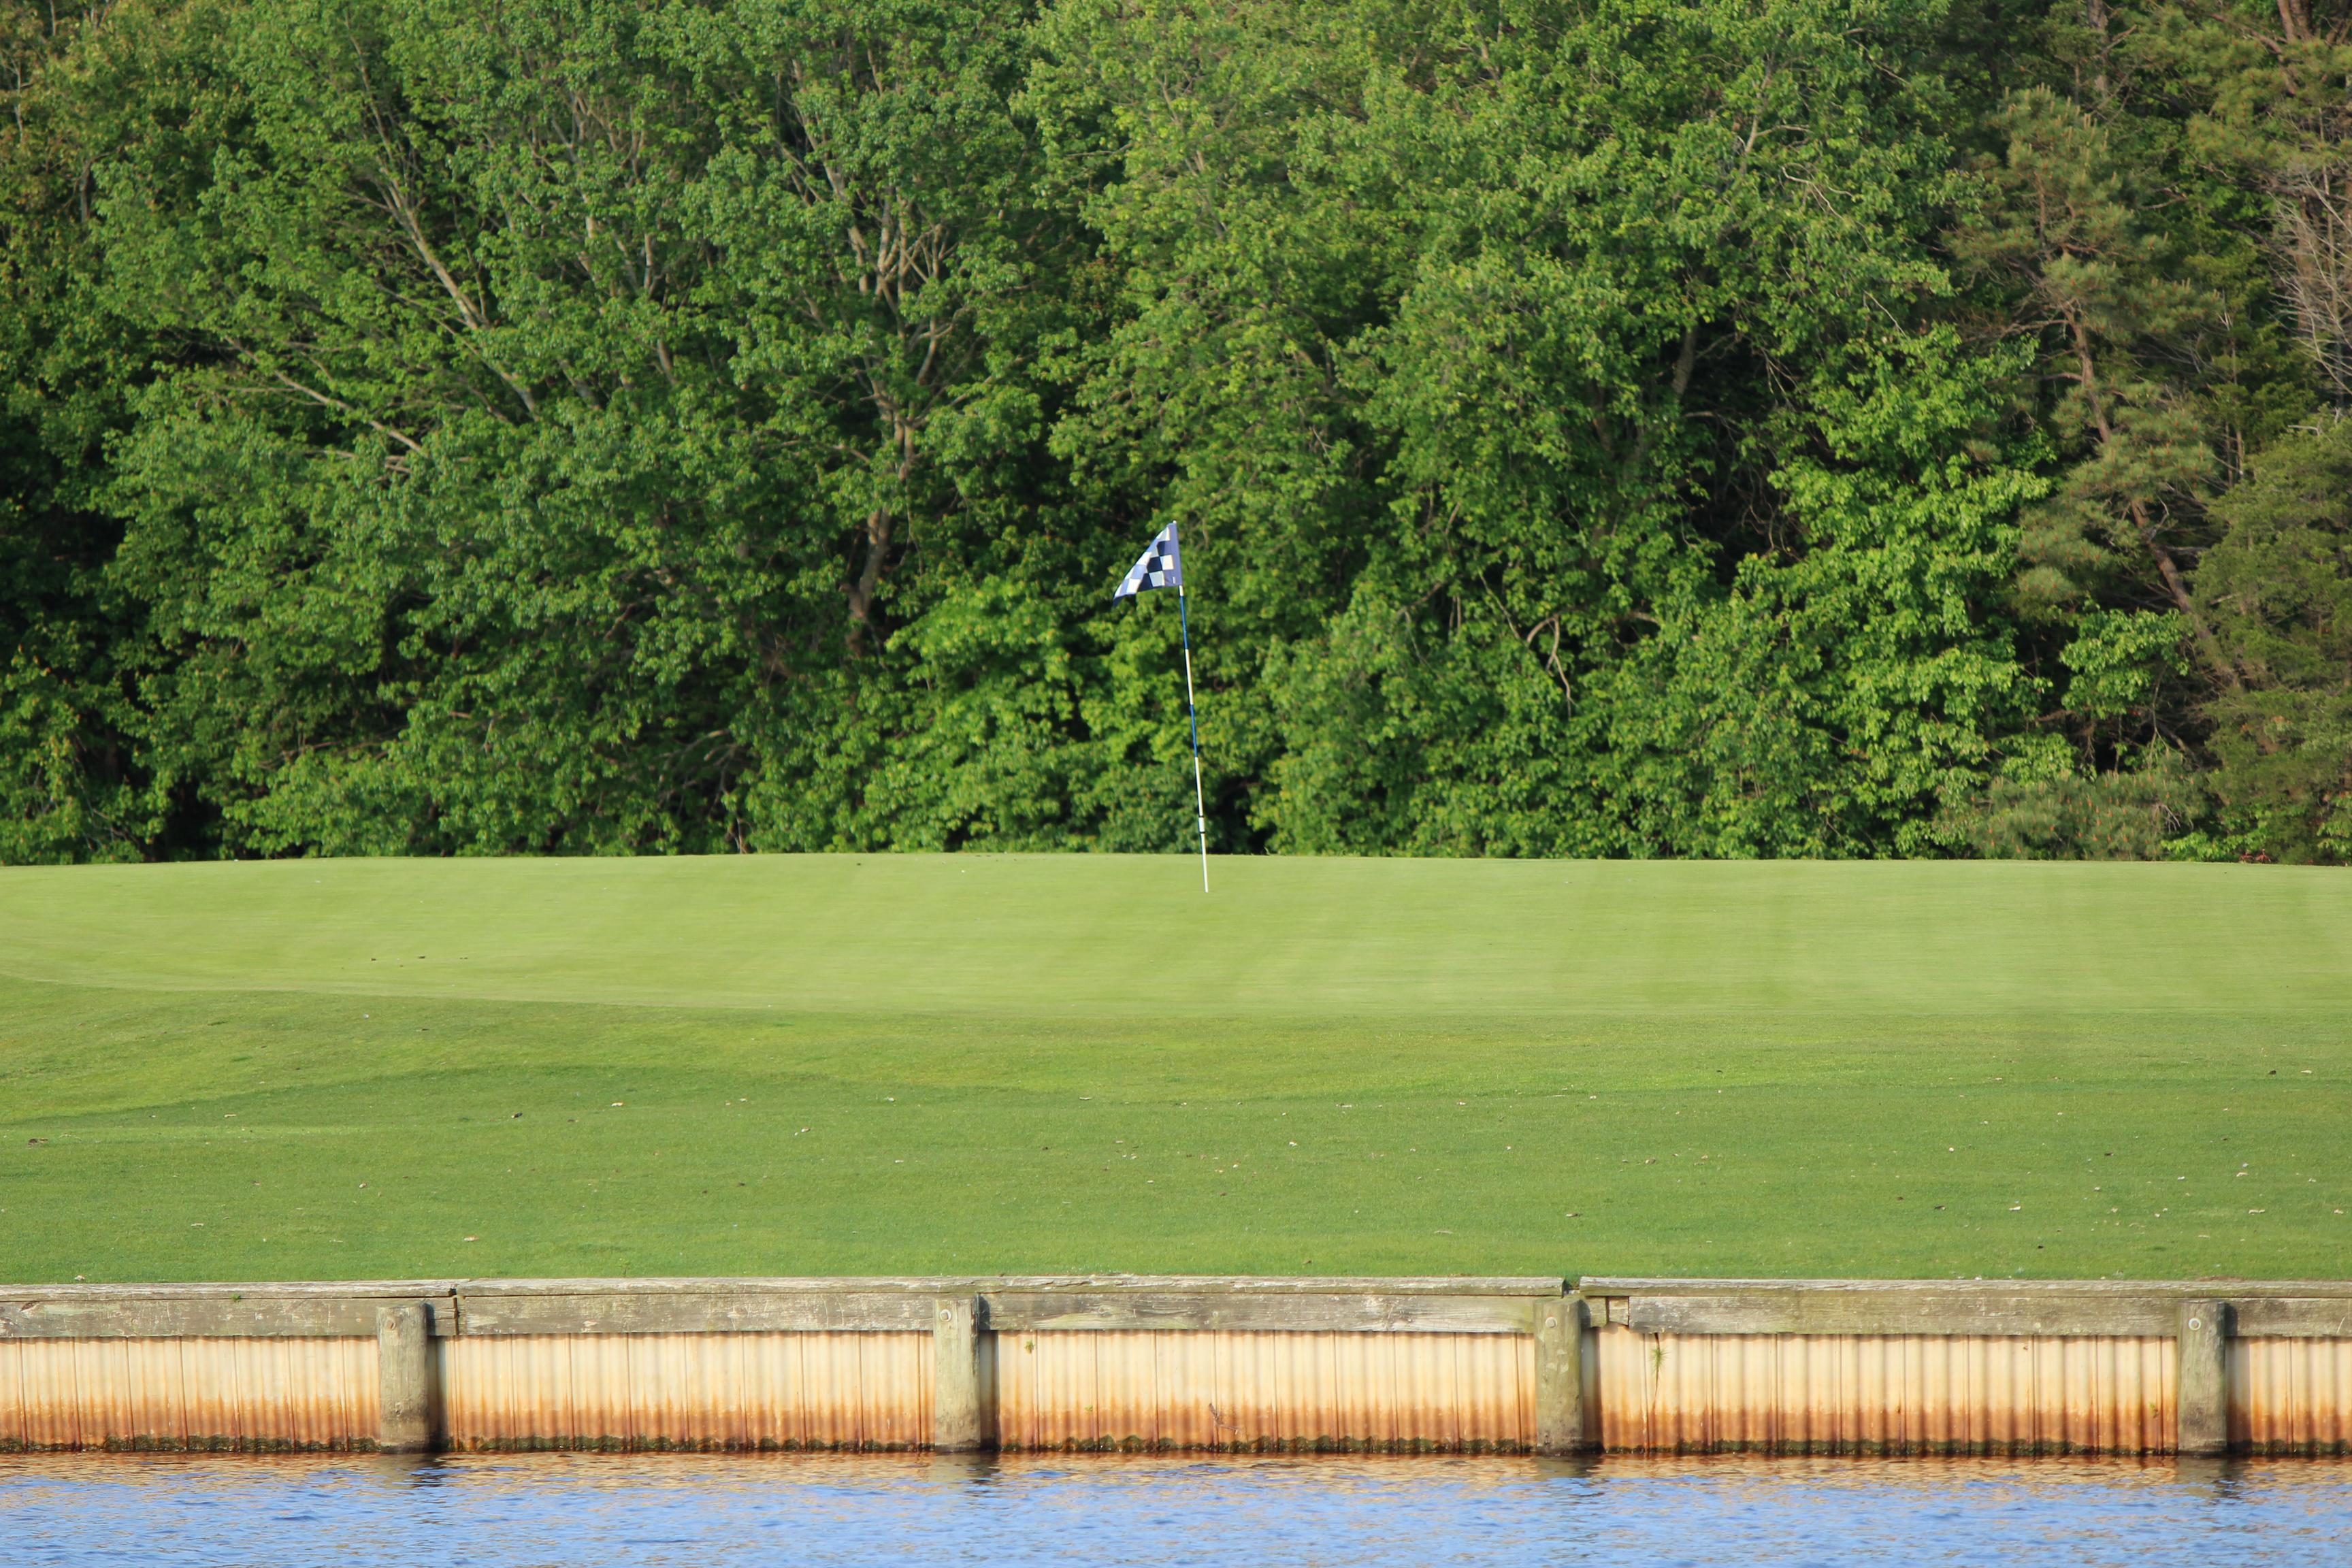 On the 10th Hole, the blue and white checkered flag is positioned in the center of the green. Holiday Lake runs up against the bulkhead that surrounds the green complex.